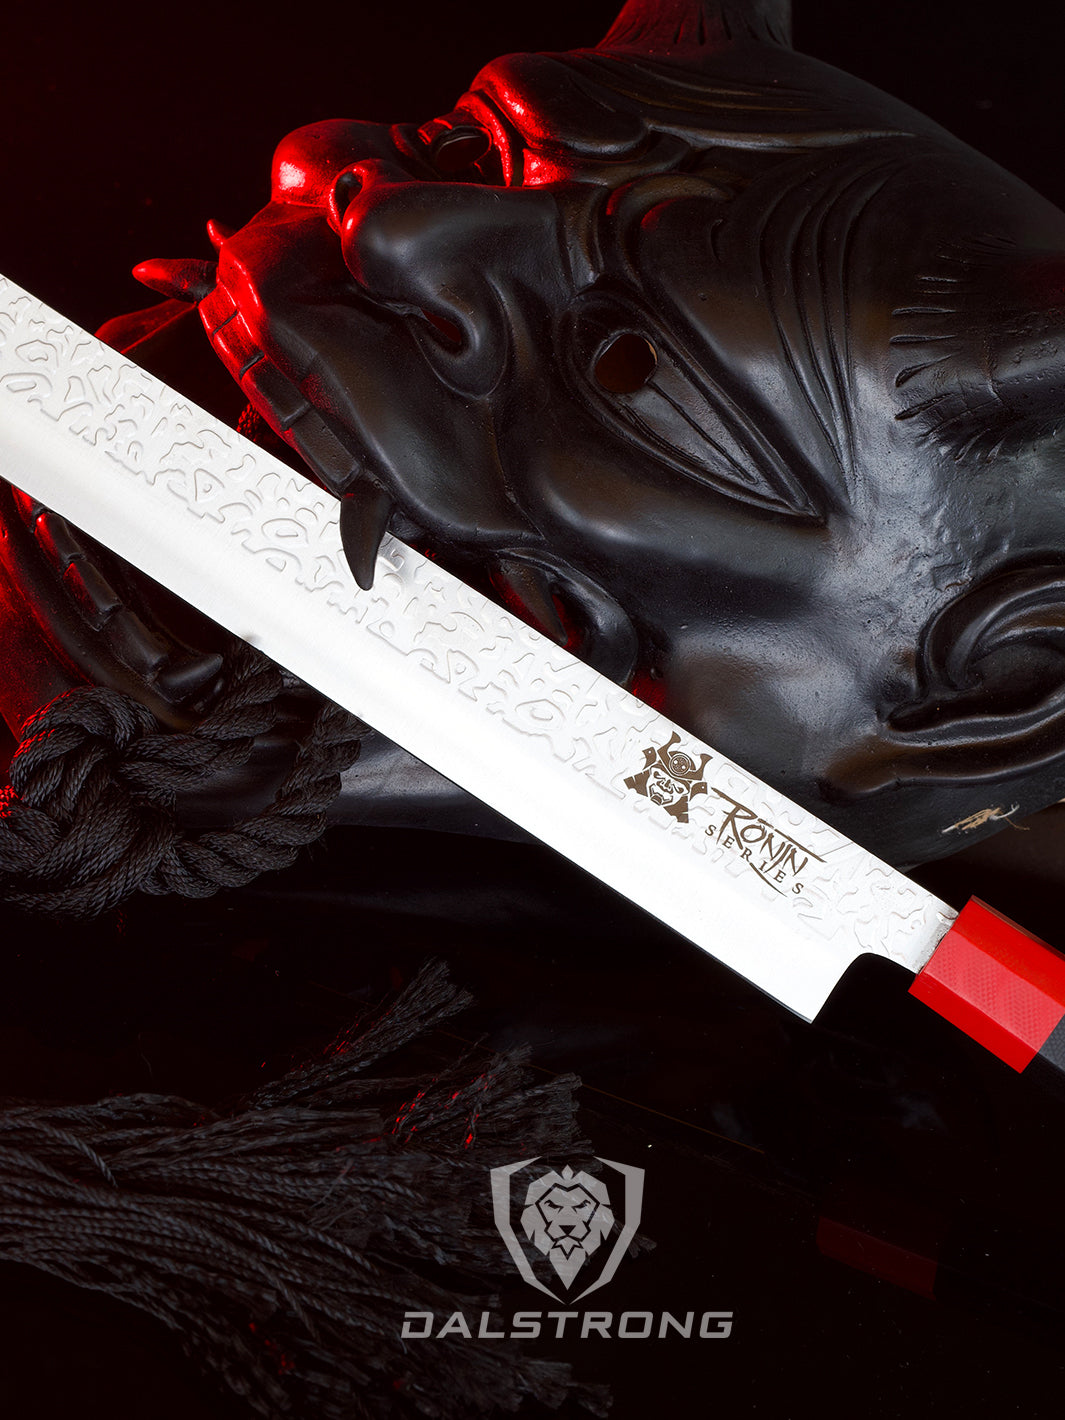 Slicing & Carving Knife 12" | Double Bevel | Ronin Series | Dalstrong ©